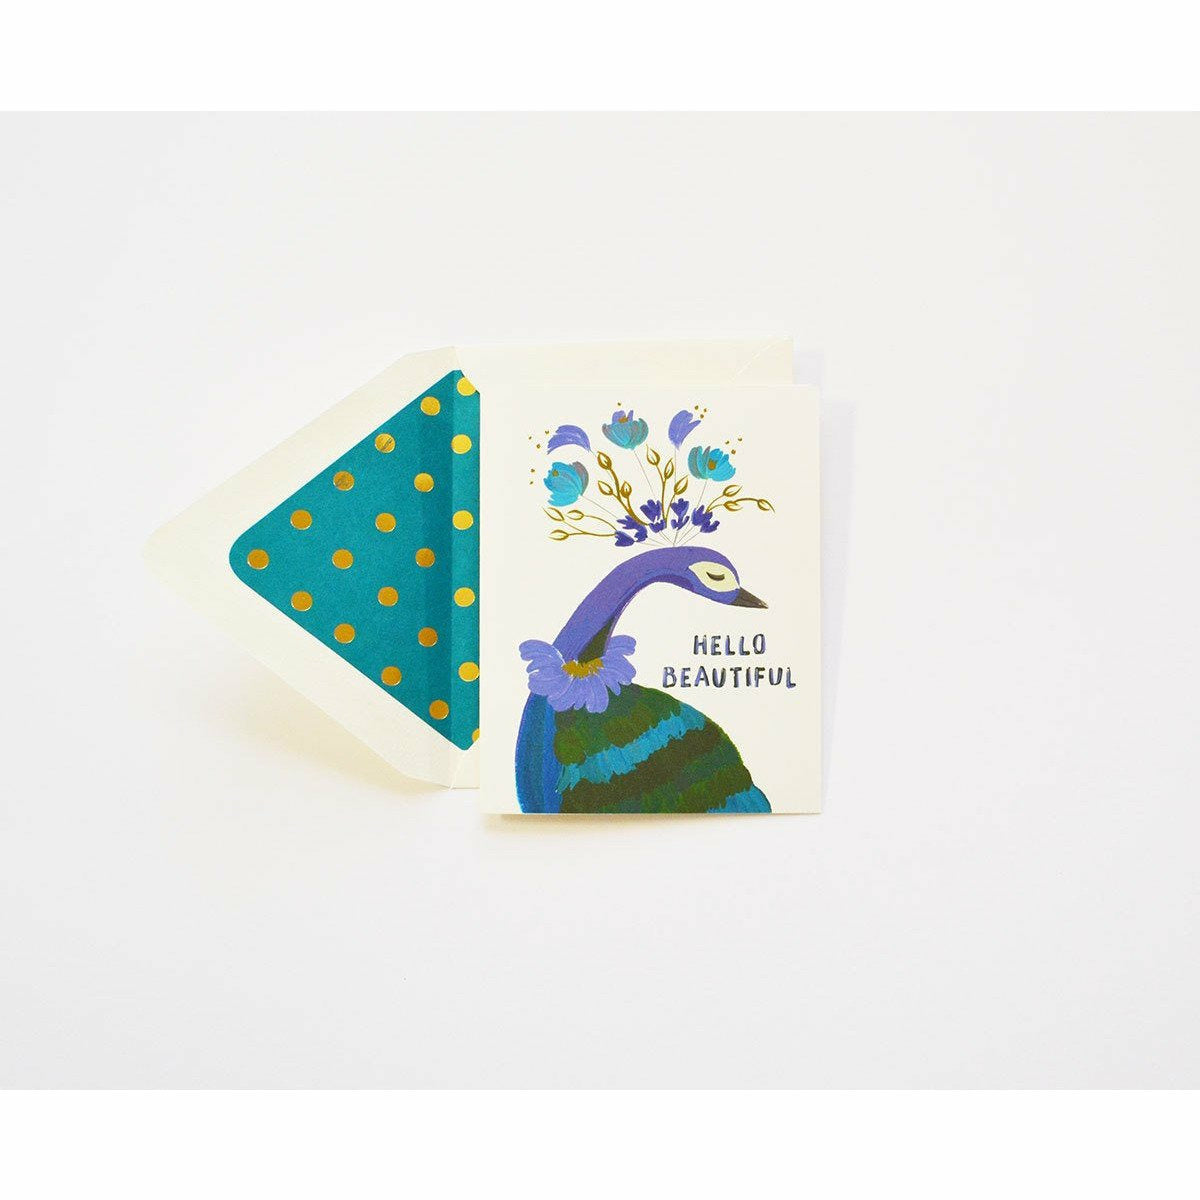 Hello Beautiful Peacock in Teal Card - The First Snow